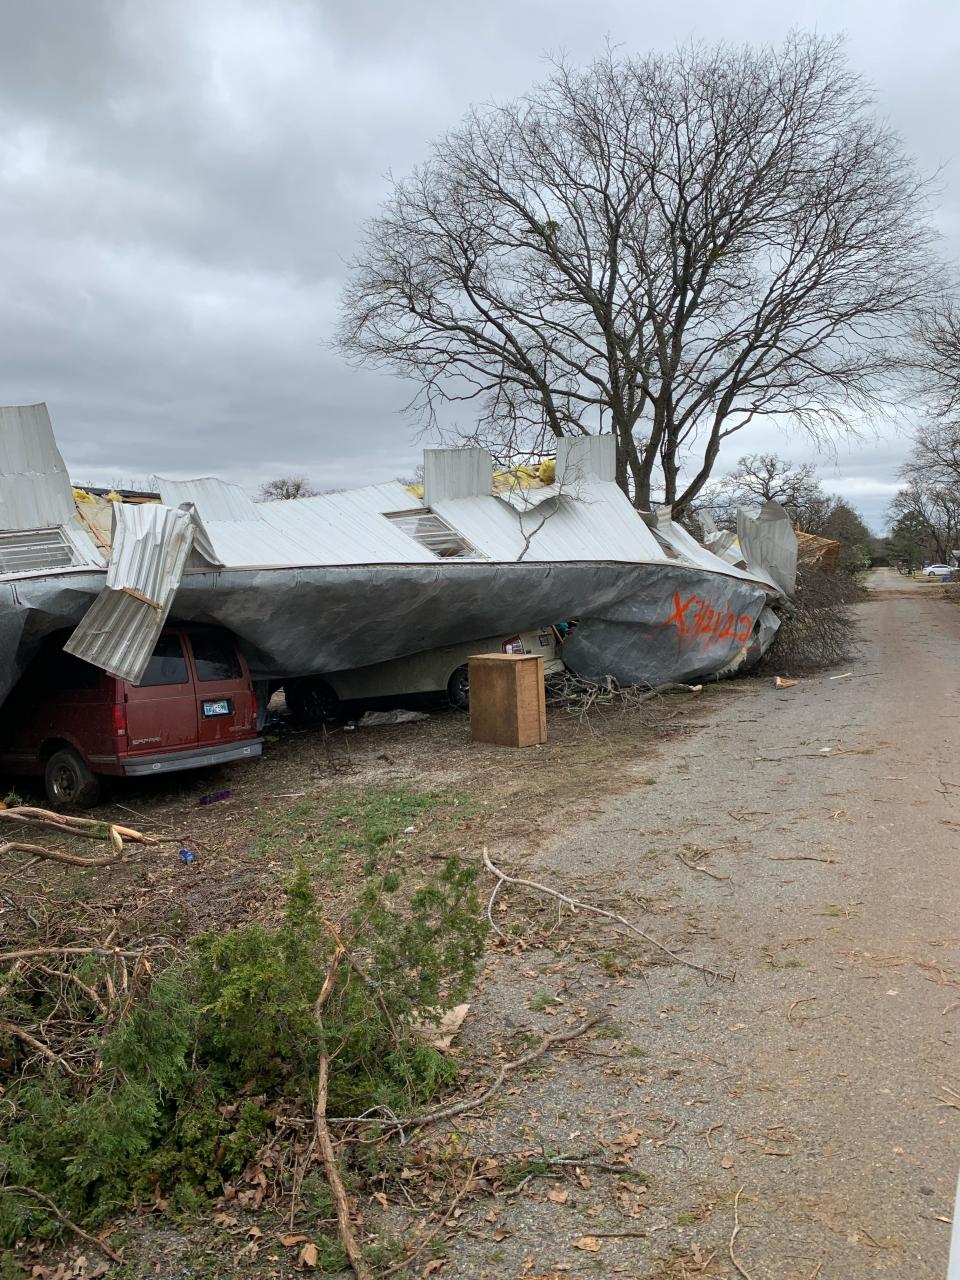 County commissioners are working with local residents to help assess damage from Monday, March 21 storms. A tornado in the Sherwood Shores and Gordonville area is believed to have damaged 40-60 structures in the area.